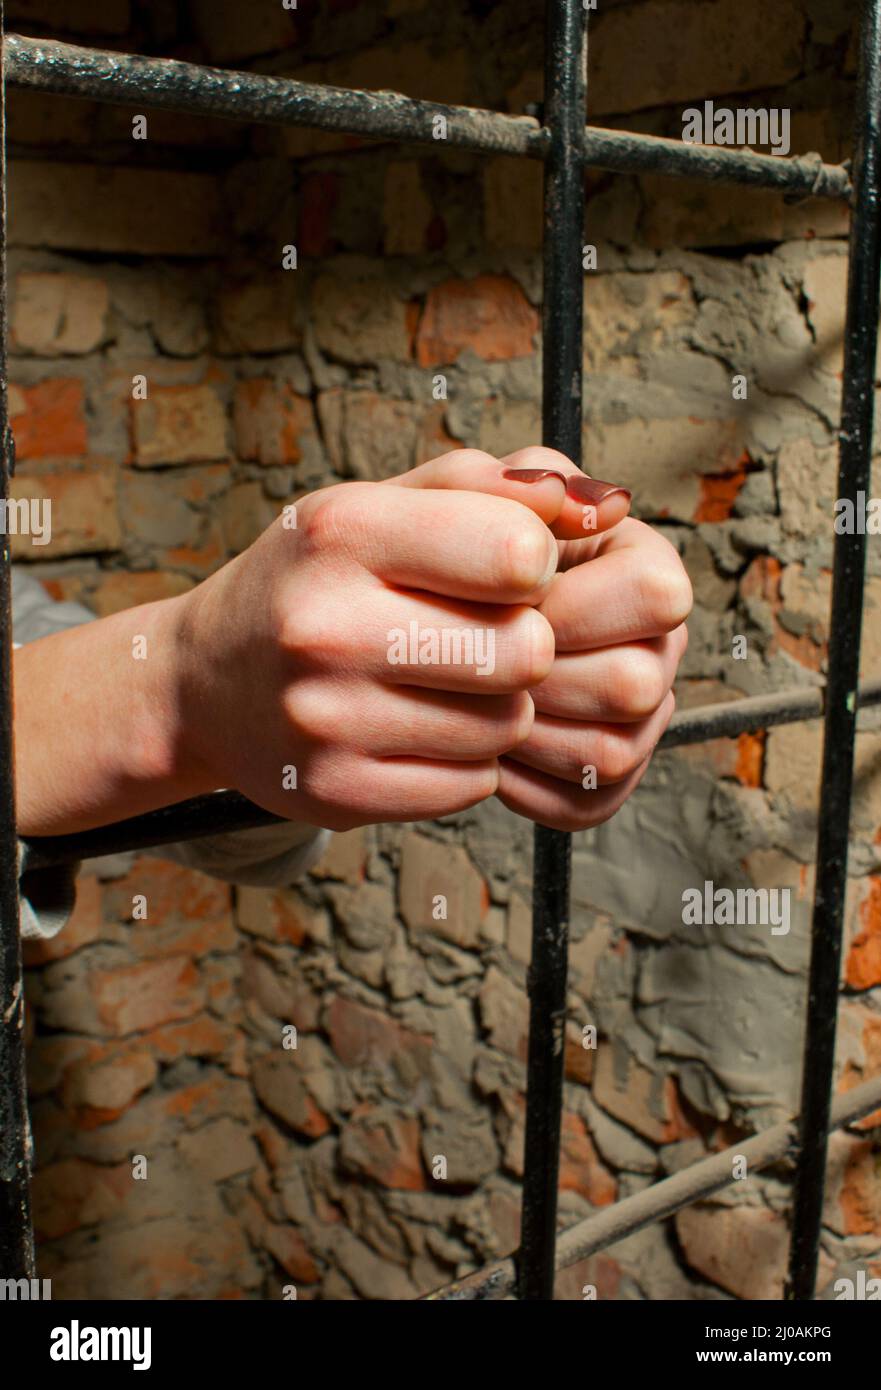 Woman hands behind the bars Stock Photo